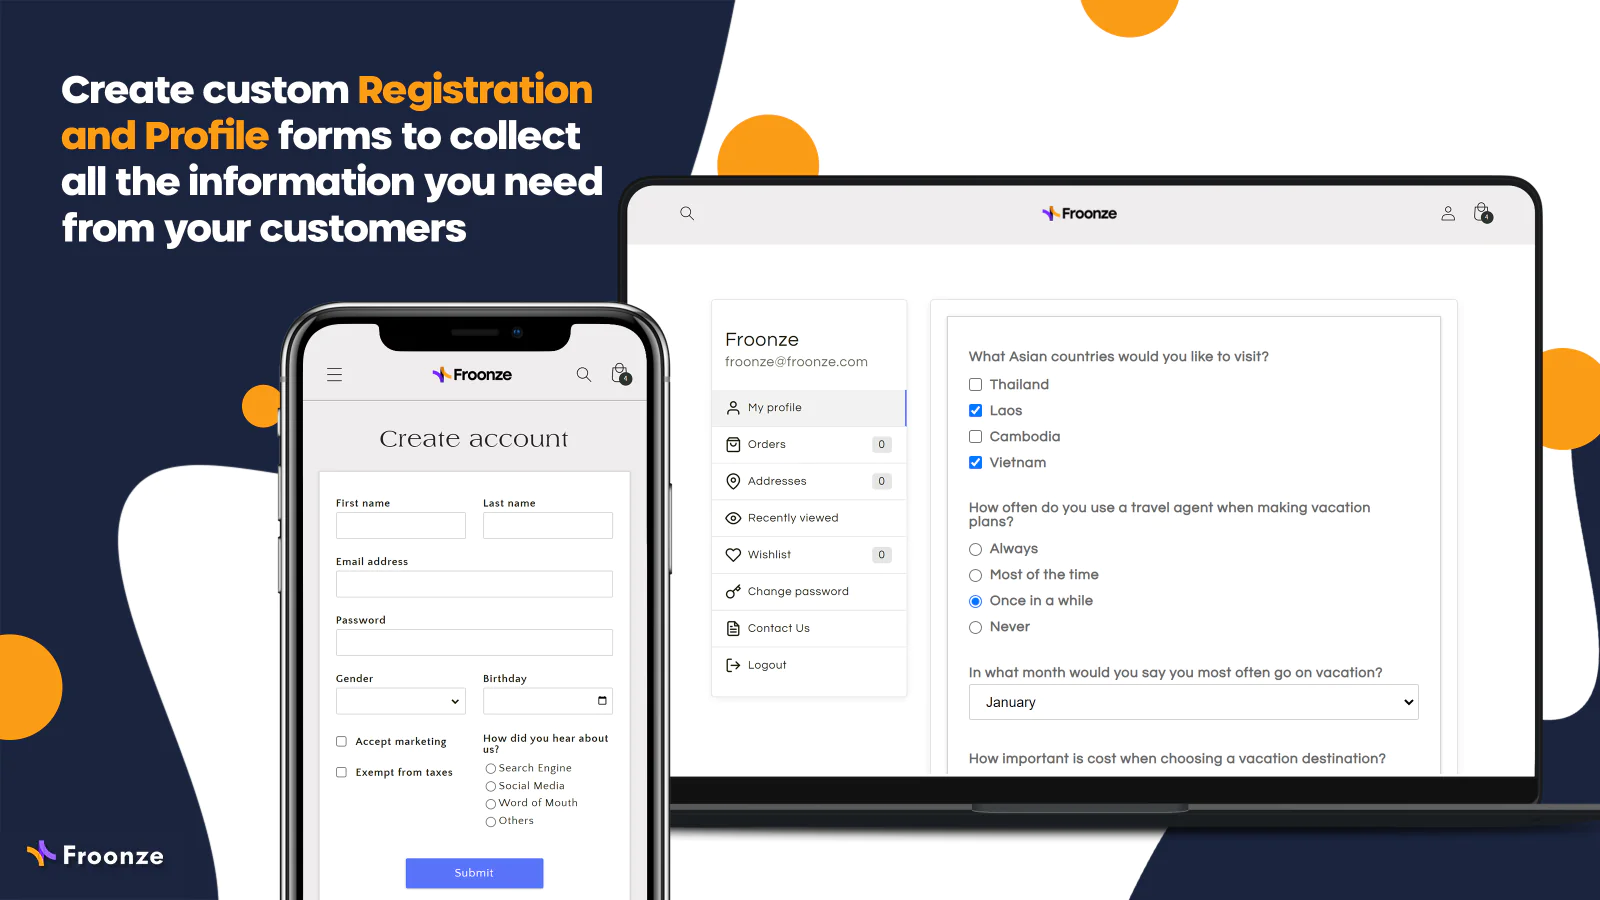 the image shows that you can create custom registration and profile forms to collect all the needed information from your customers.